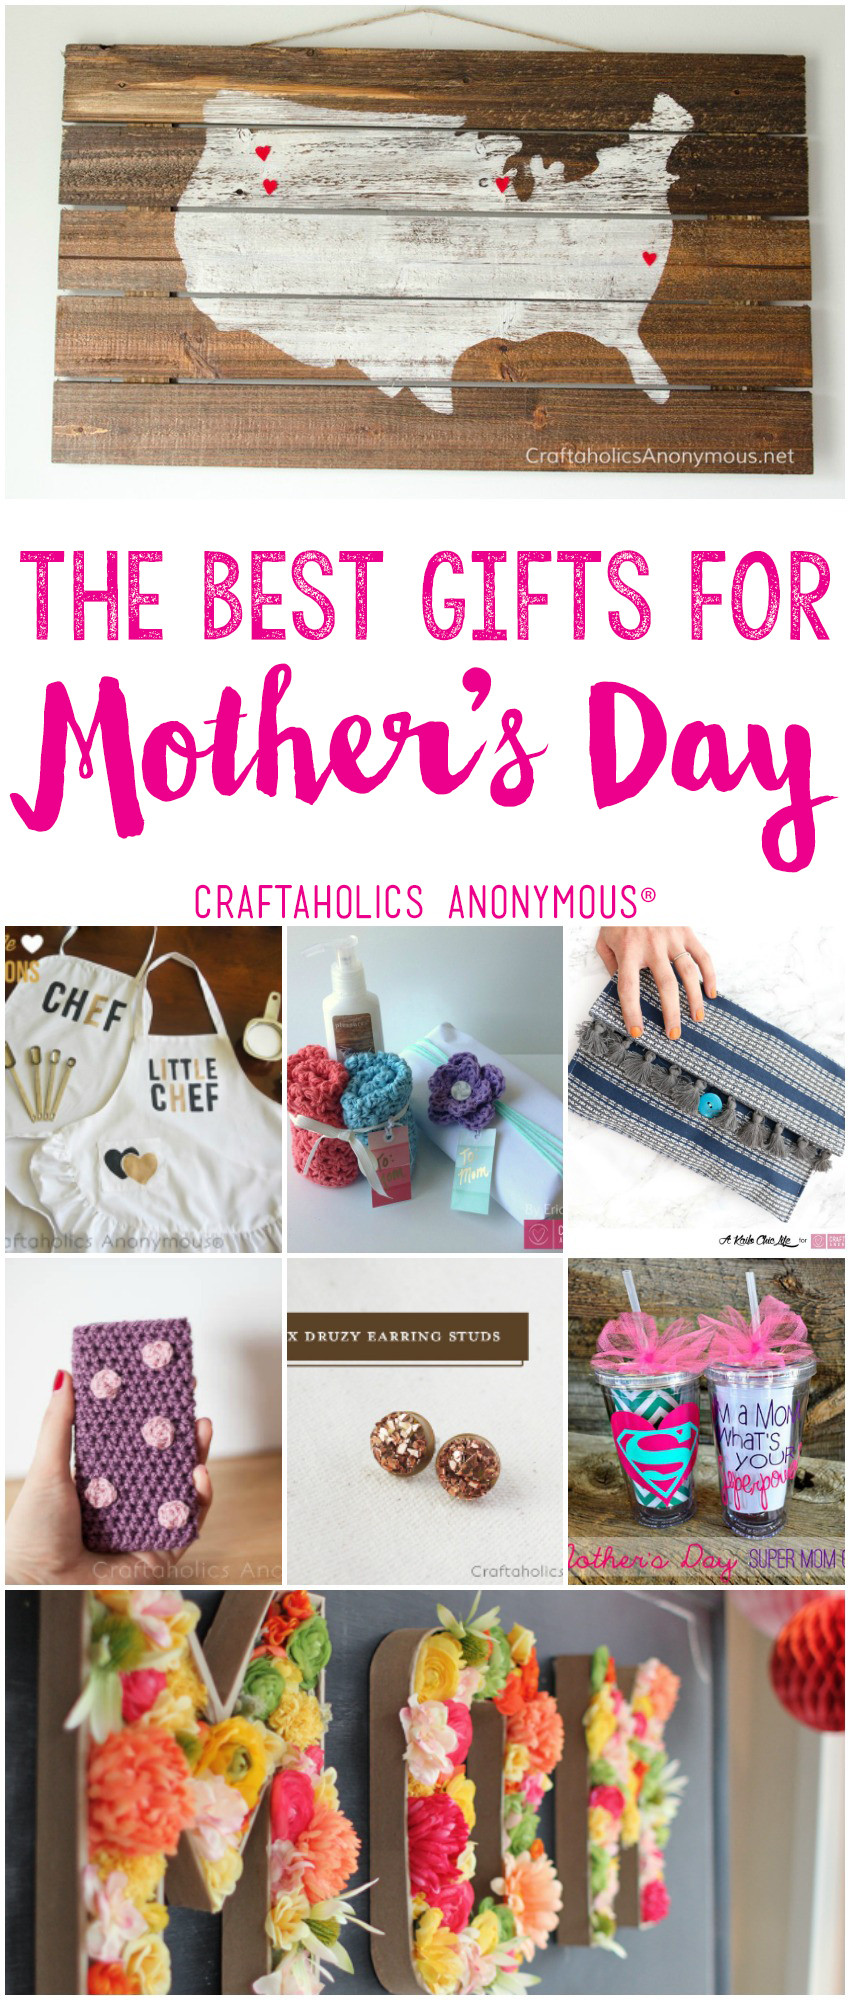 Mothers Day Special Gifts
 Craftaholics Anonymous